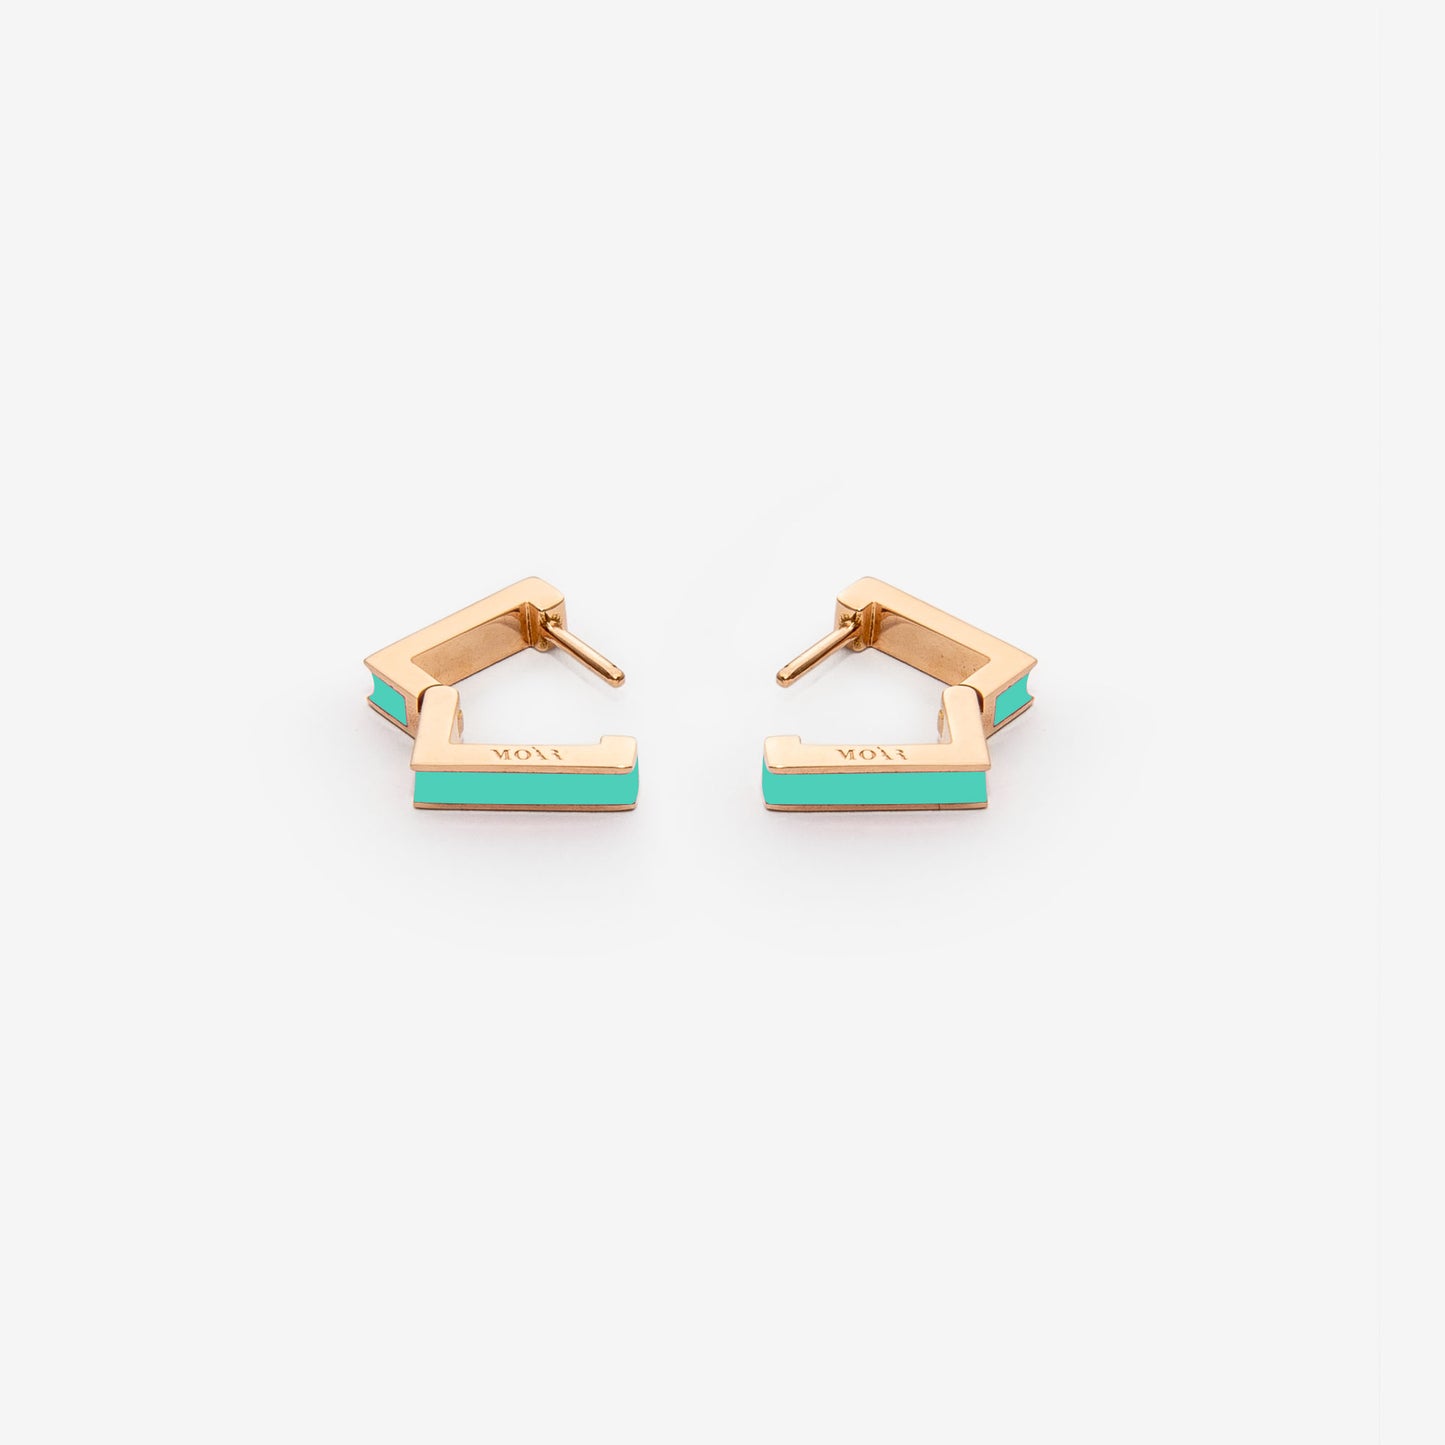 Square turquoise earrings